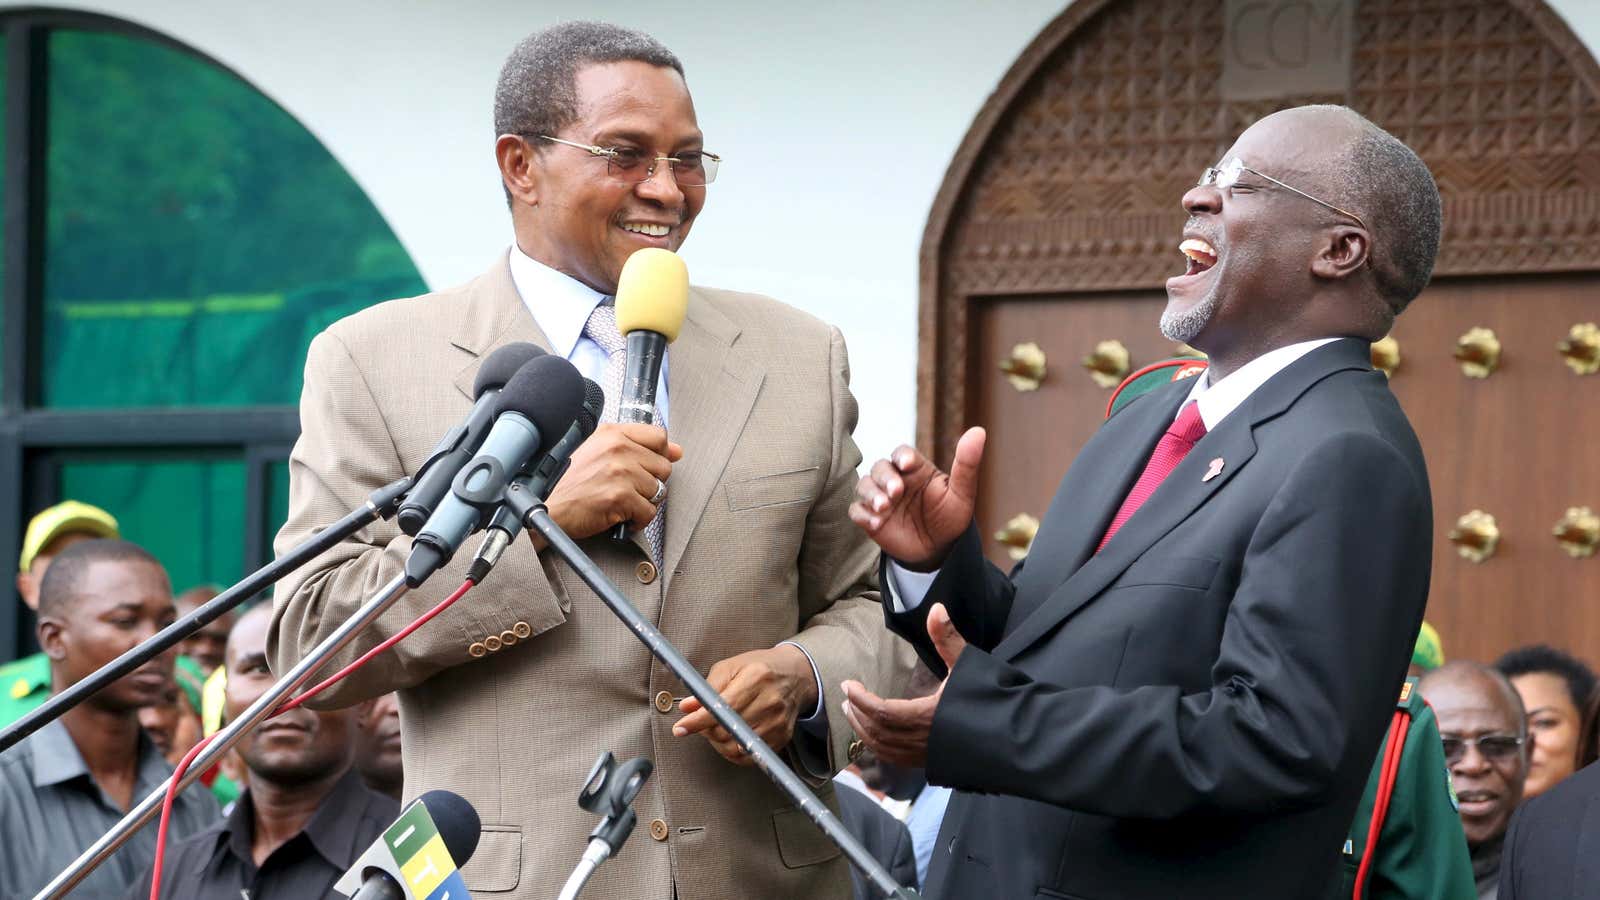 Not all jokes get President Magufuli (right) laughing.